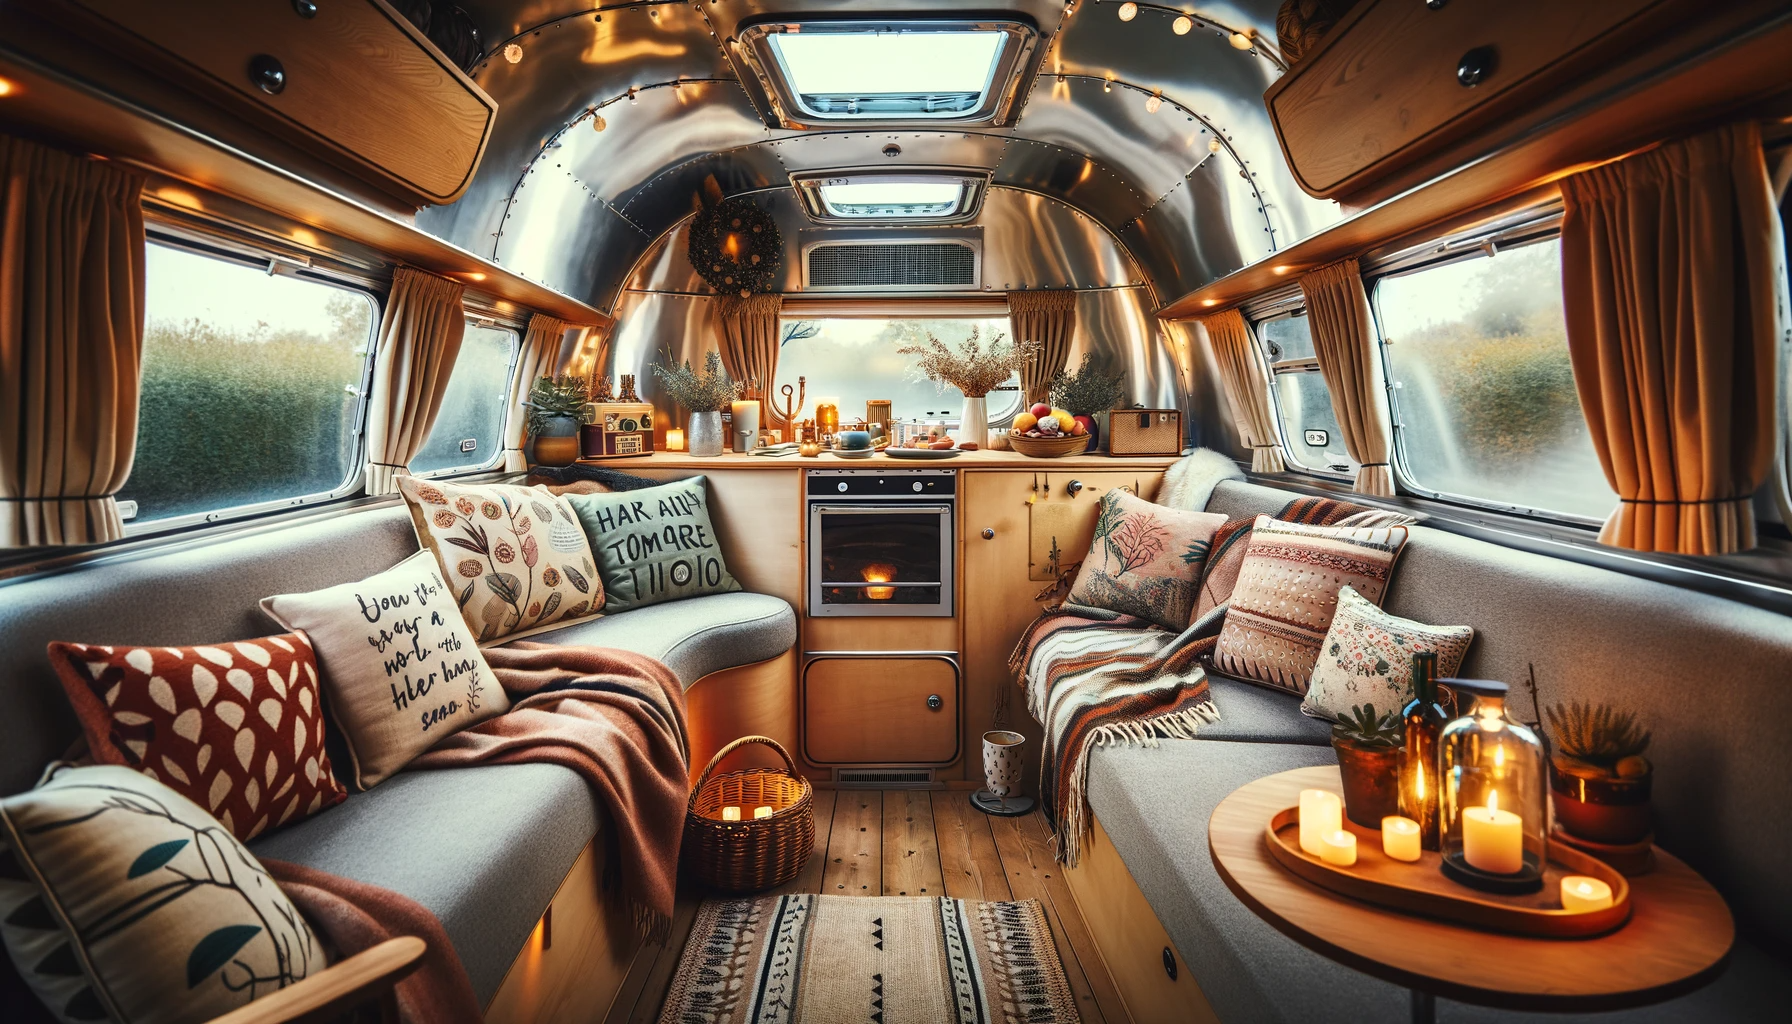 An inviting image of a cosy Airstream caravan interior, beautifully styled with vintage-inspired decor and modern comforts.